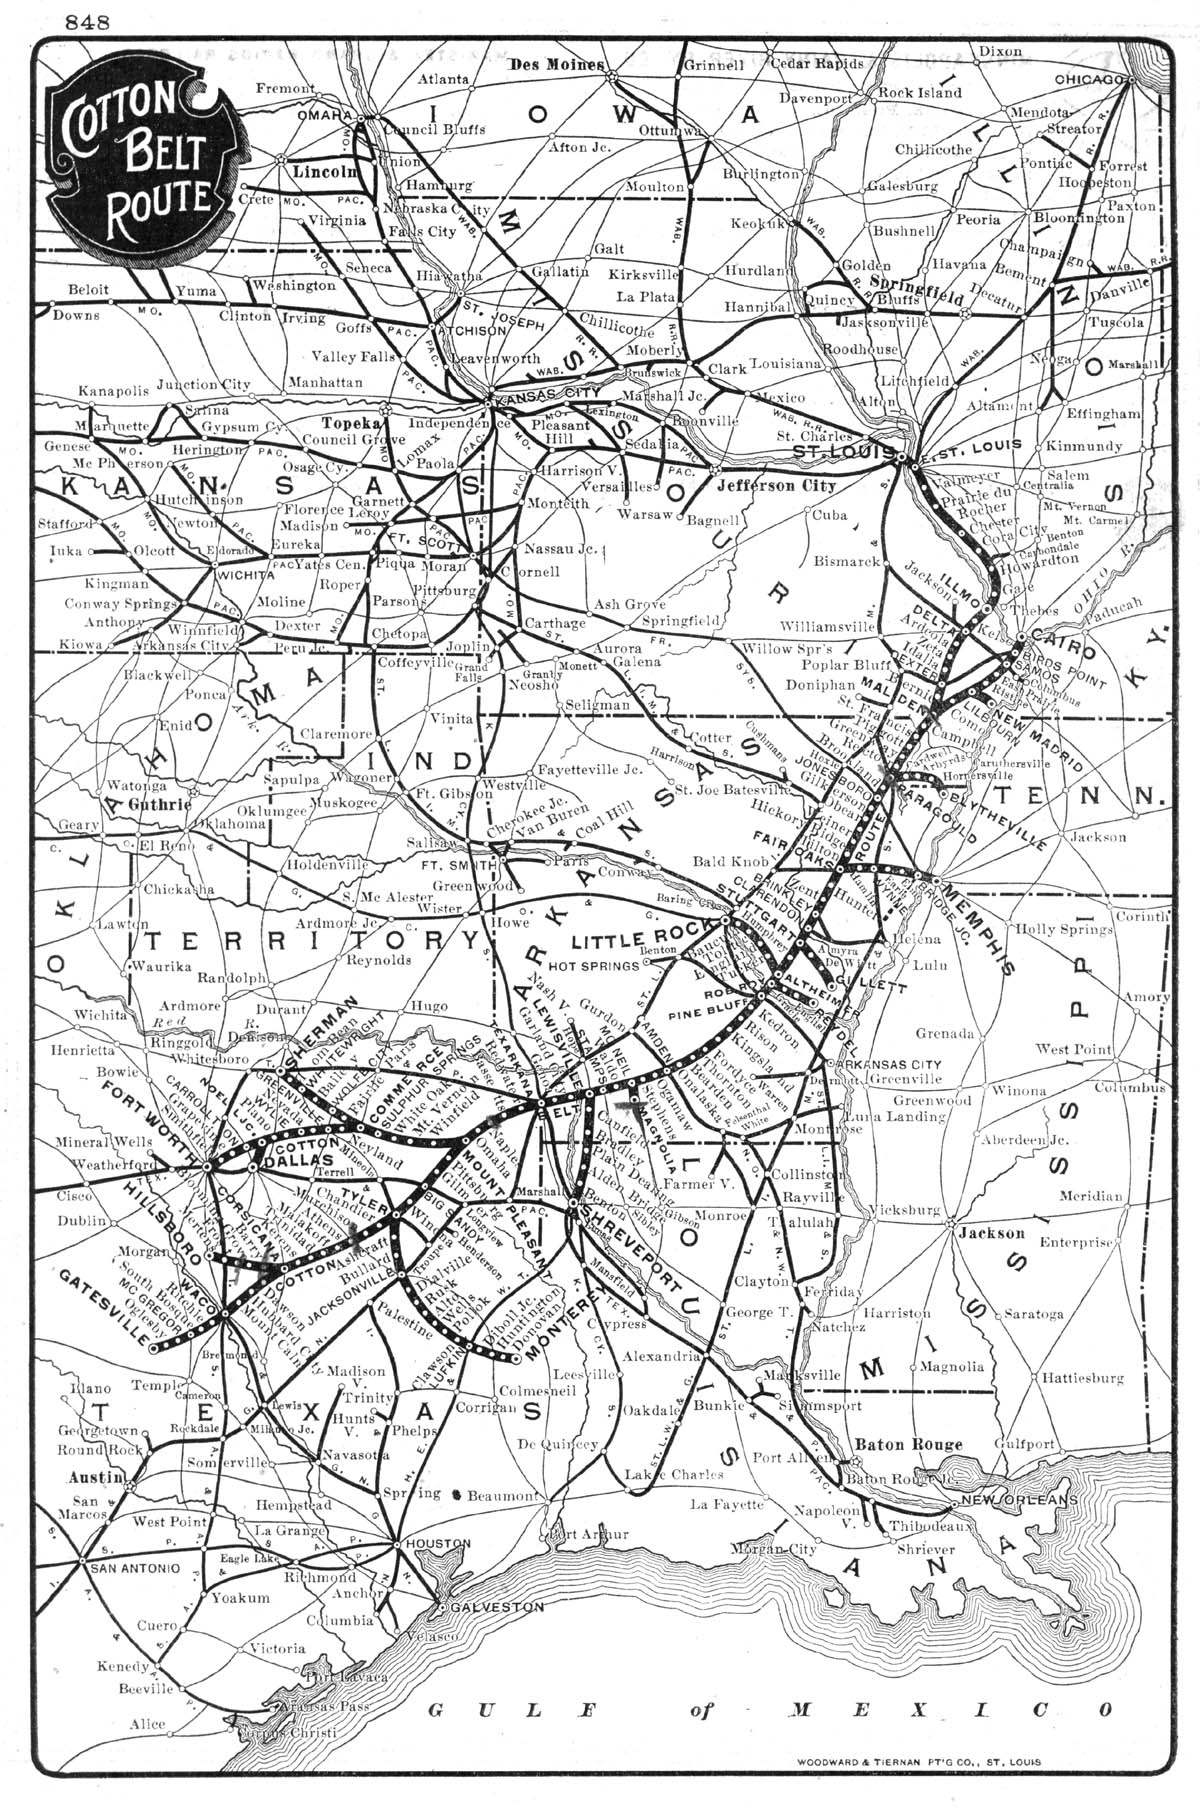 St. Louis-Southwestern Railroad Company (Cotton Belt System), Reference Map Showing Route in 1906.